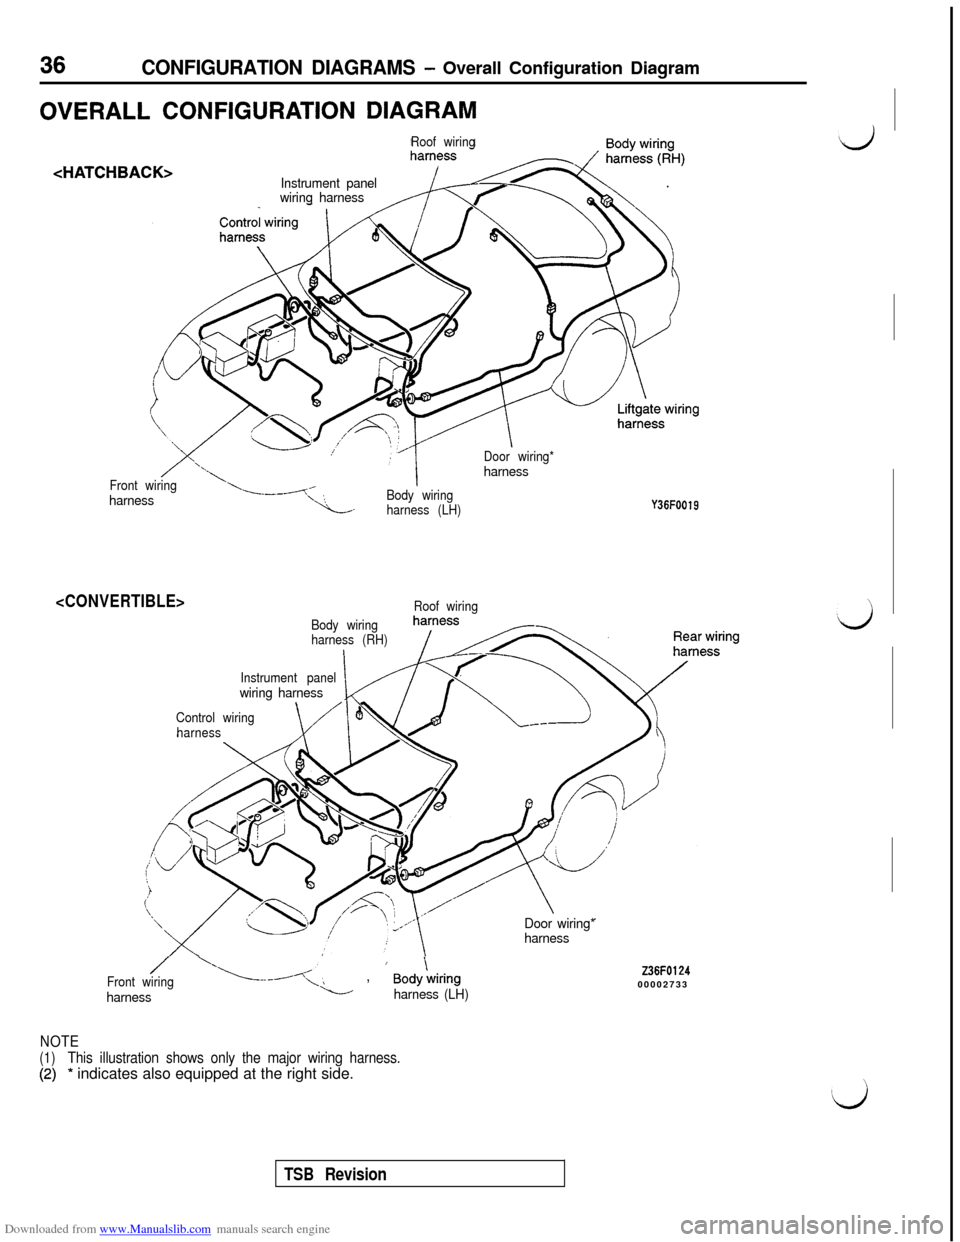 MITSUBISHI 3000GT 1994 2.G Workshop Manual Downloaded from www.Manualslib.com manuals search engine 36CONFIGURATION DIAGRAMS - Overall Configuration Diagram
OVERALL CONFIGURATION DIAGRAM
<HAT1
Roof wiring
CHBACK>Instrument panel
wiring harness